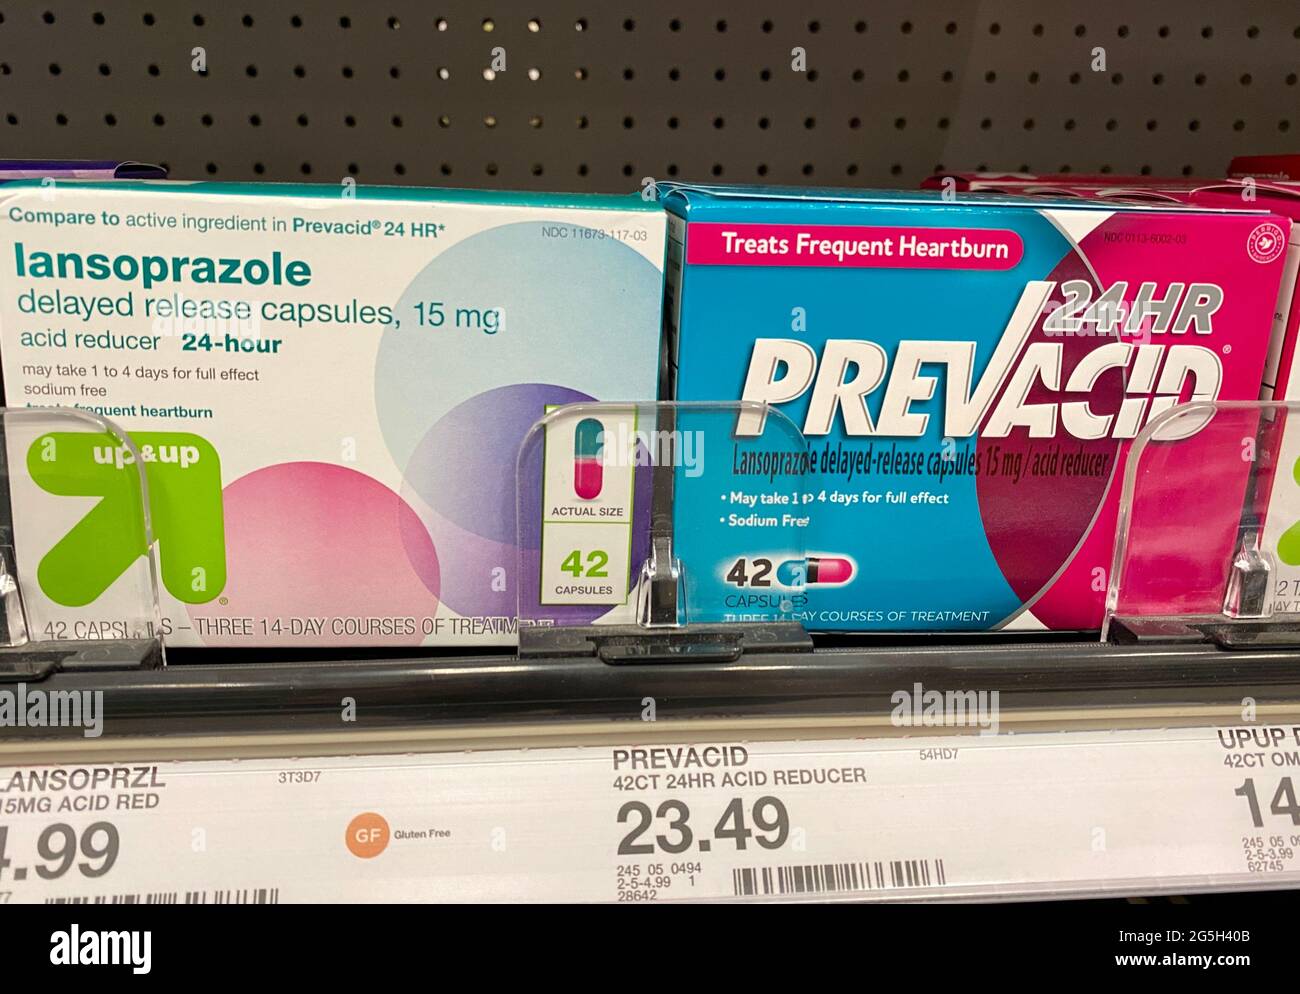 Boxes of Prevacid 24HR heartburn medicine on the shelf at a Target store. Stock Photo